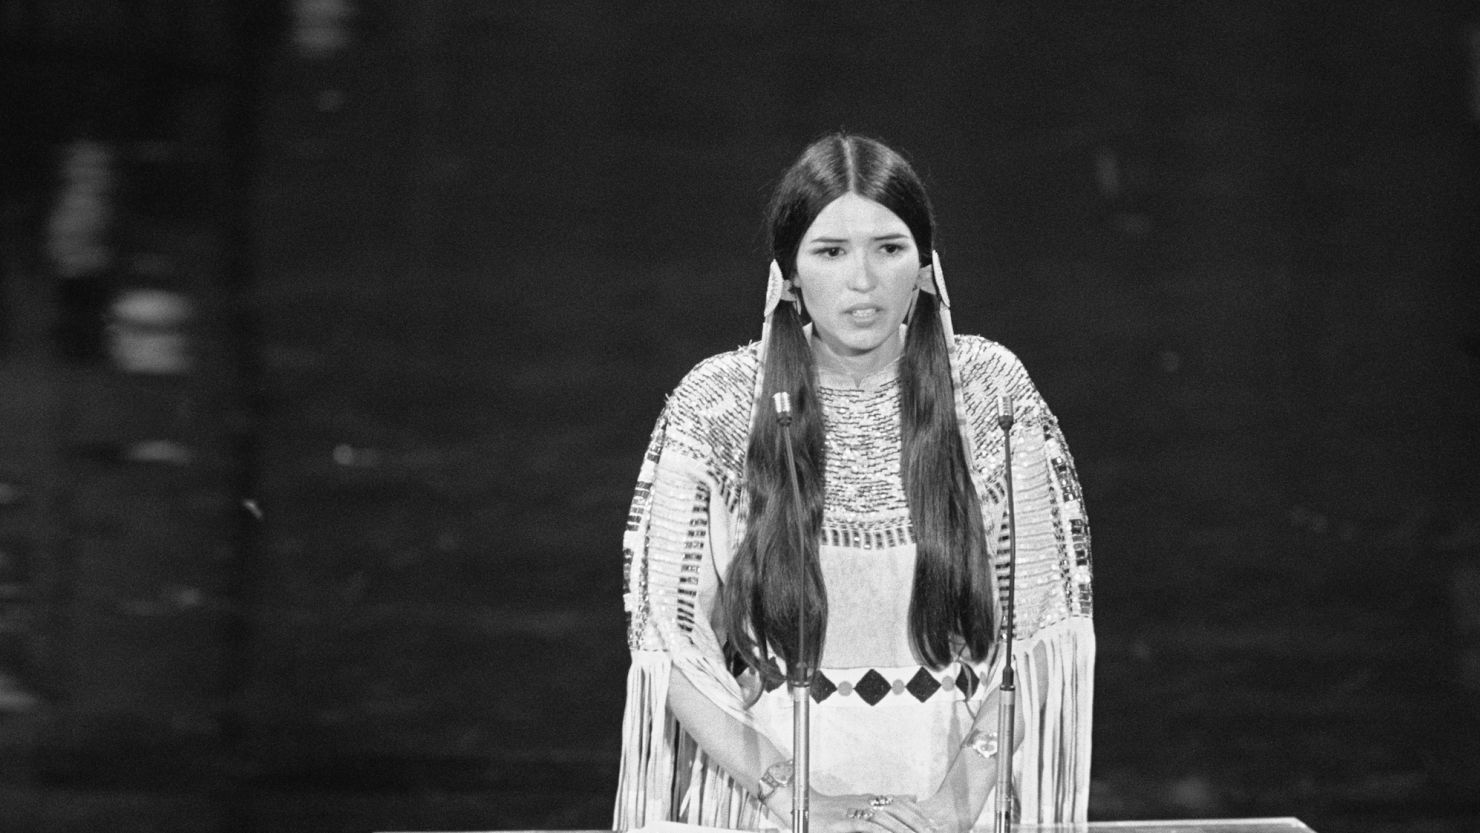 Sacheen Littlefeather famously declined the best actor Oscar on behalf of Marlon Brando at the 1973 Academy Awards. In her speech, she spoke out against Hollywood's treatment of Native Americans.